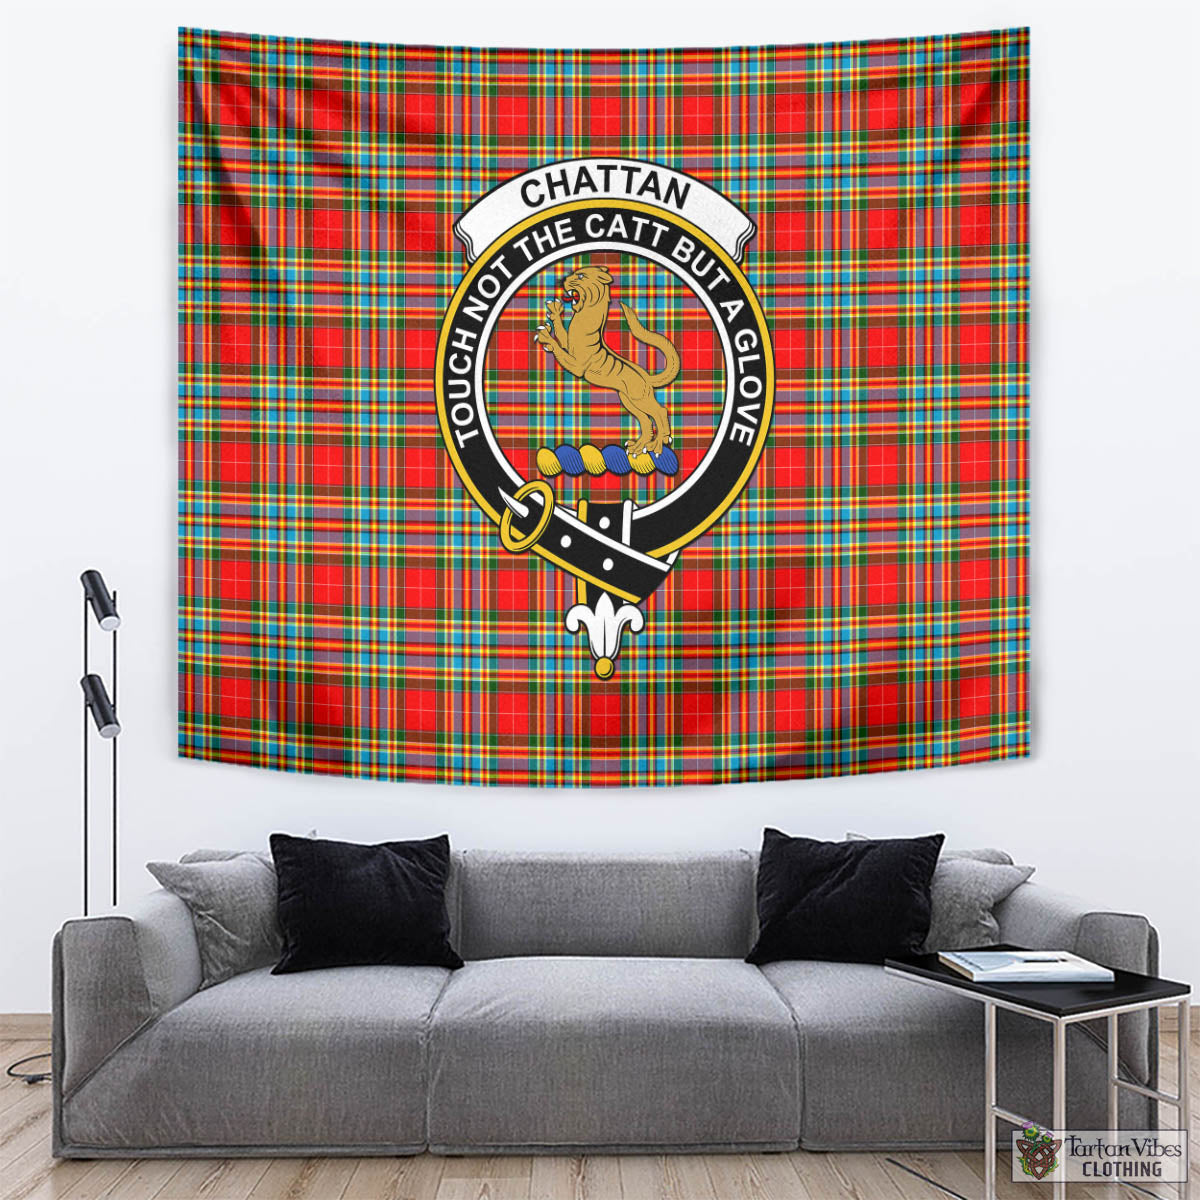 Tartan Vibes Clothing Chattan Tartan Tapestry Wall Hanging and Home Decor for Room with Family Crest